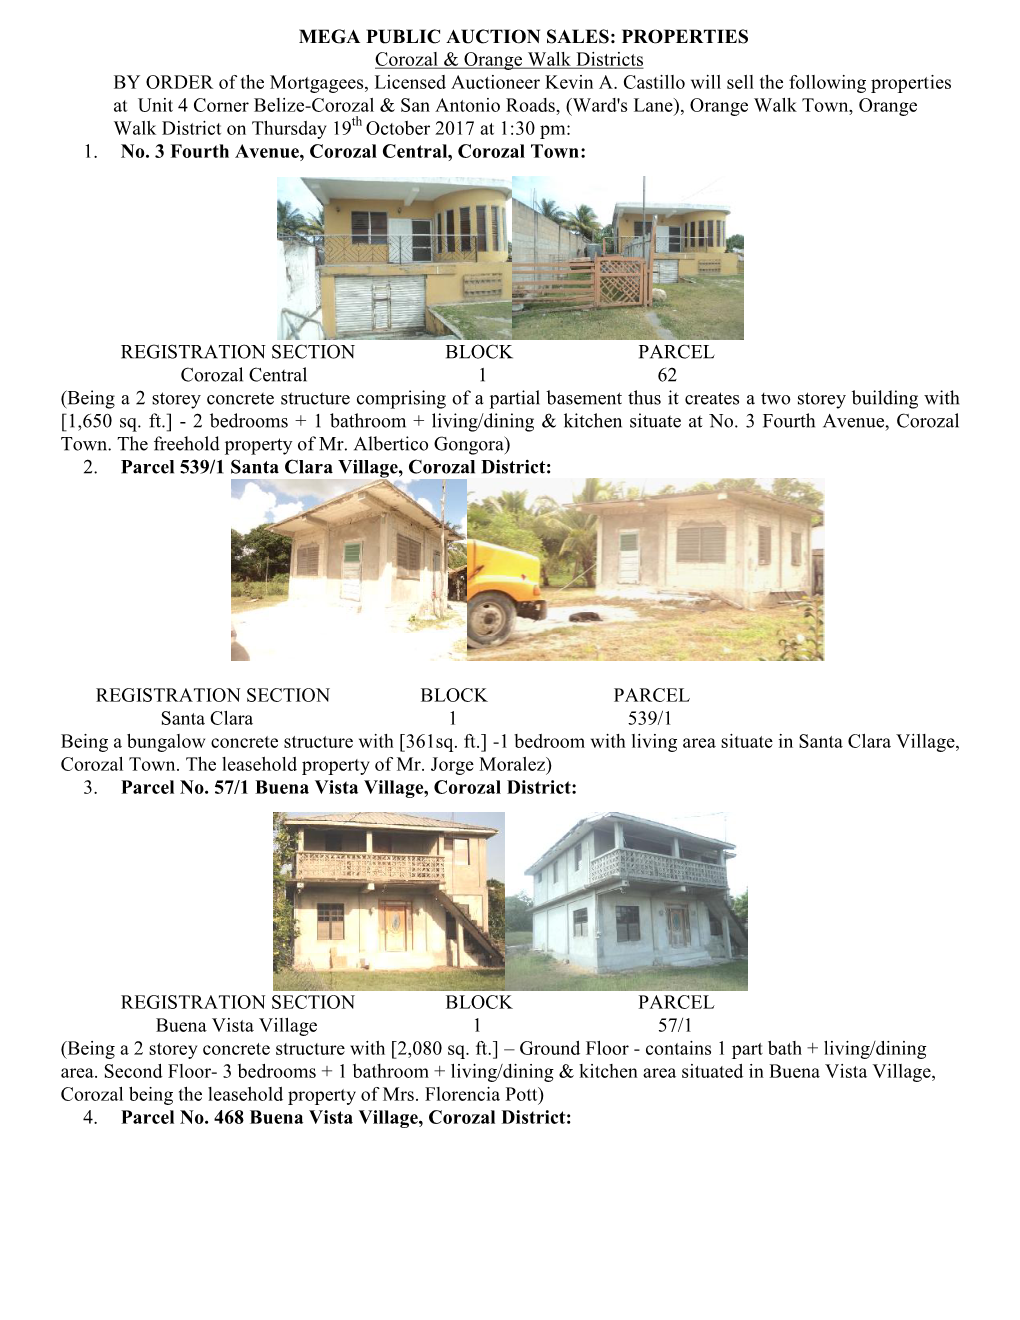 MEGA PUBLIC AUCTION SALES: PROPERTIES Corozal & Orange Walk Districts by ORDER of the Mortgagees, Licensed Auctioneer Kevin